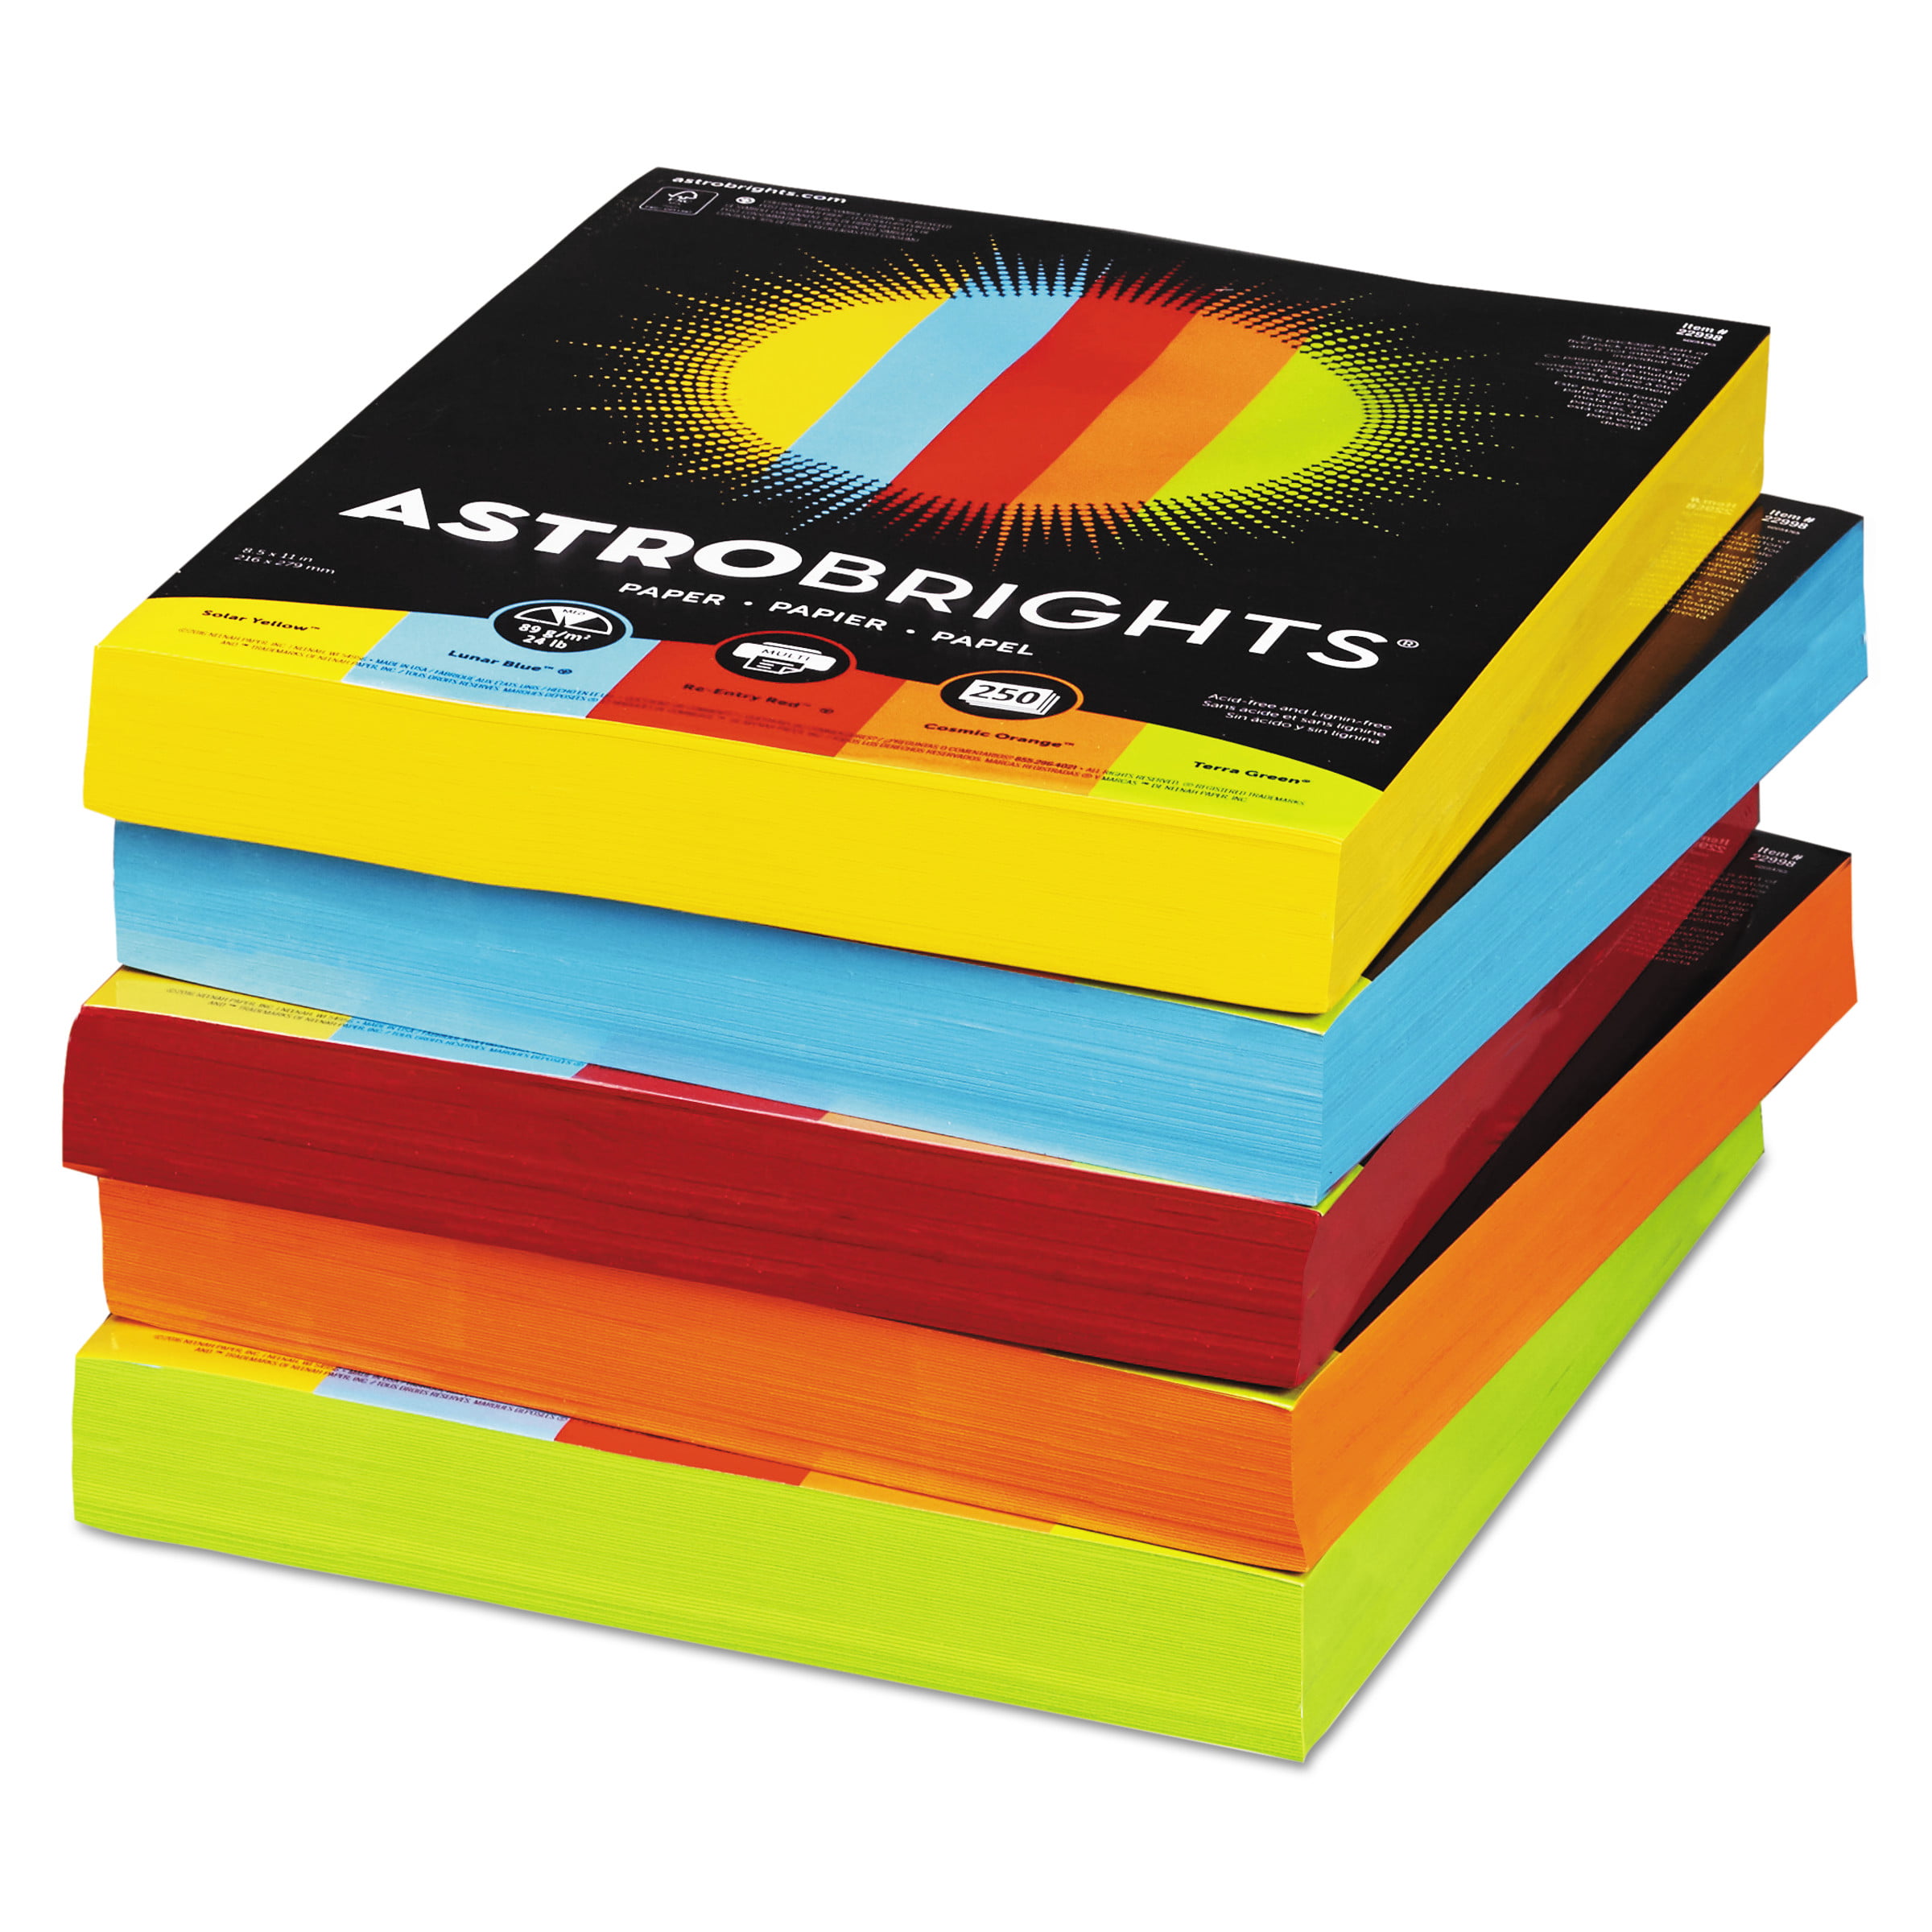 Astrobrights Colored Cardstock, 8.5 X11 65 lb/176 gsm, Pastel 5-Color Assortment, 6 Individual Packs of 50 Pastel Assorted Sheets - 300 Sheets